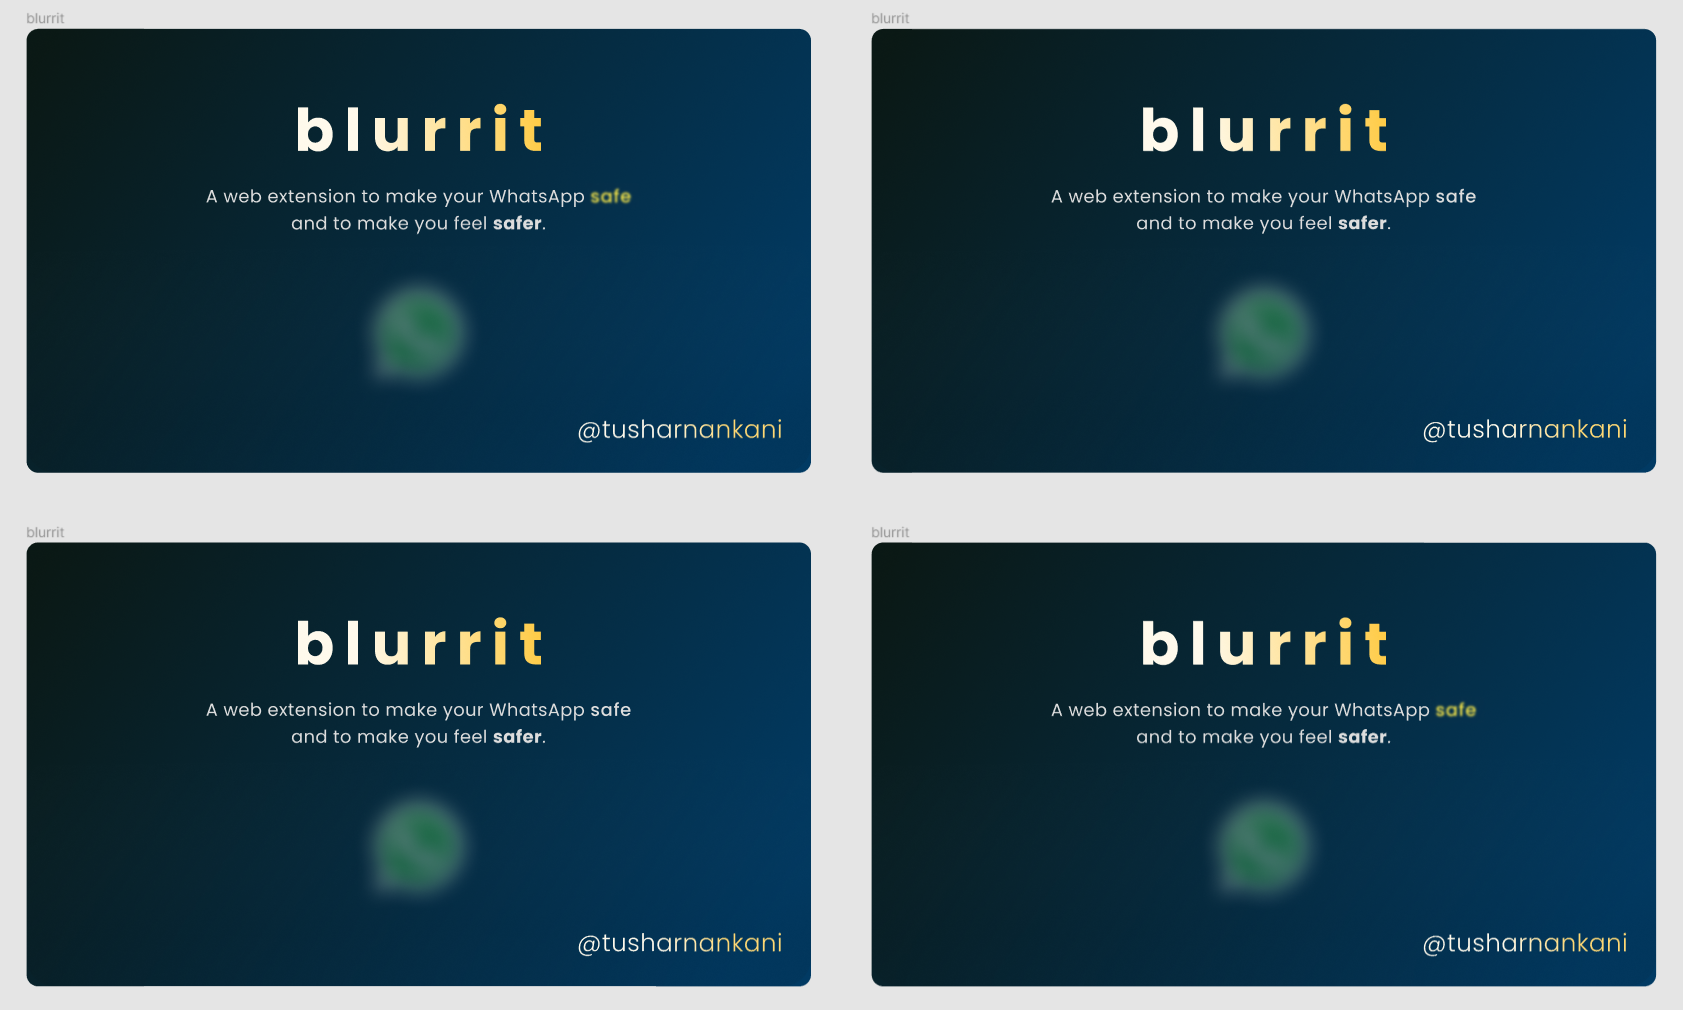 A swapped interswapped snippet of the differences of blurrit covers